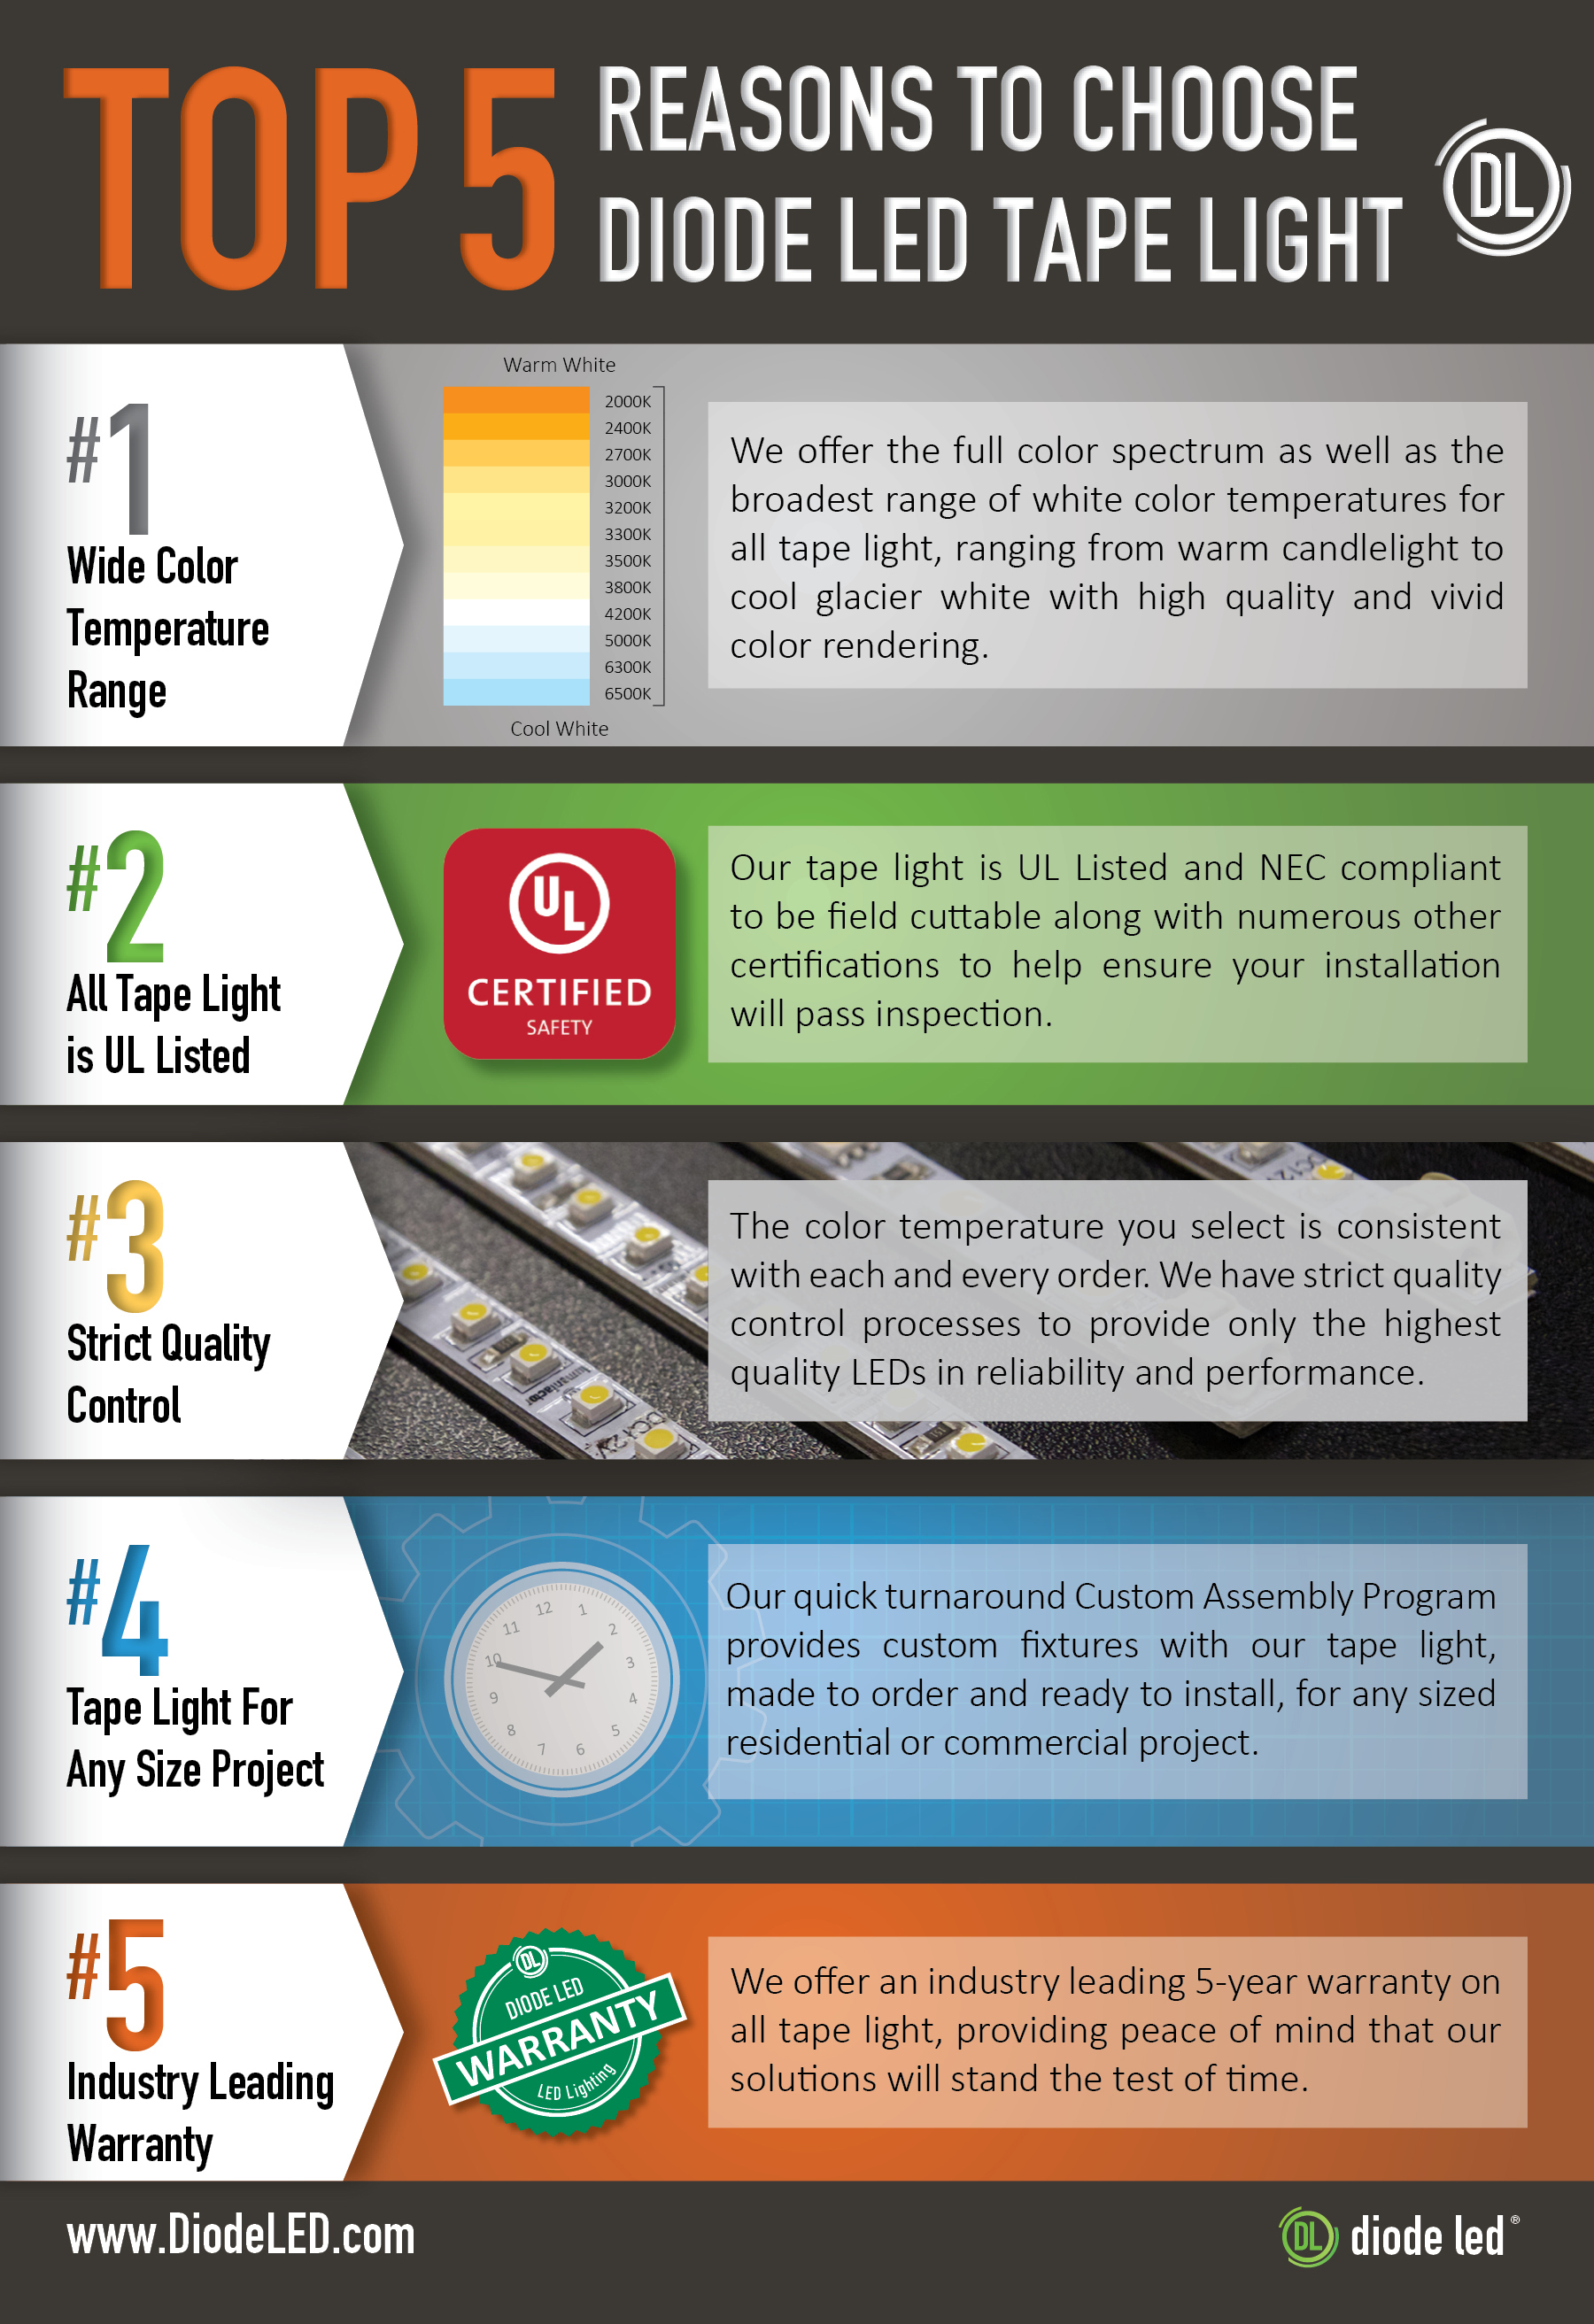 Top 5 reasons to buy Diode led tape light